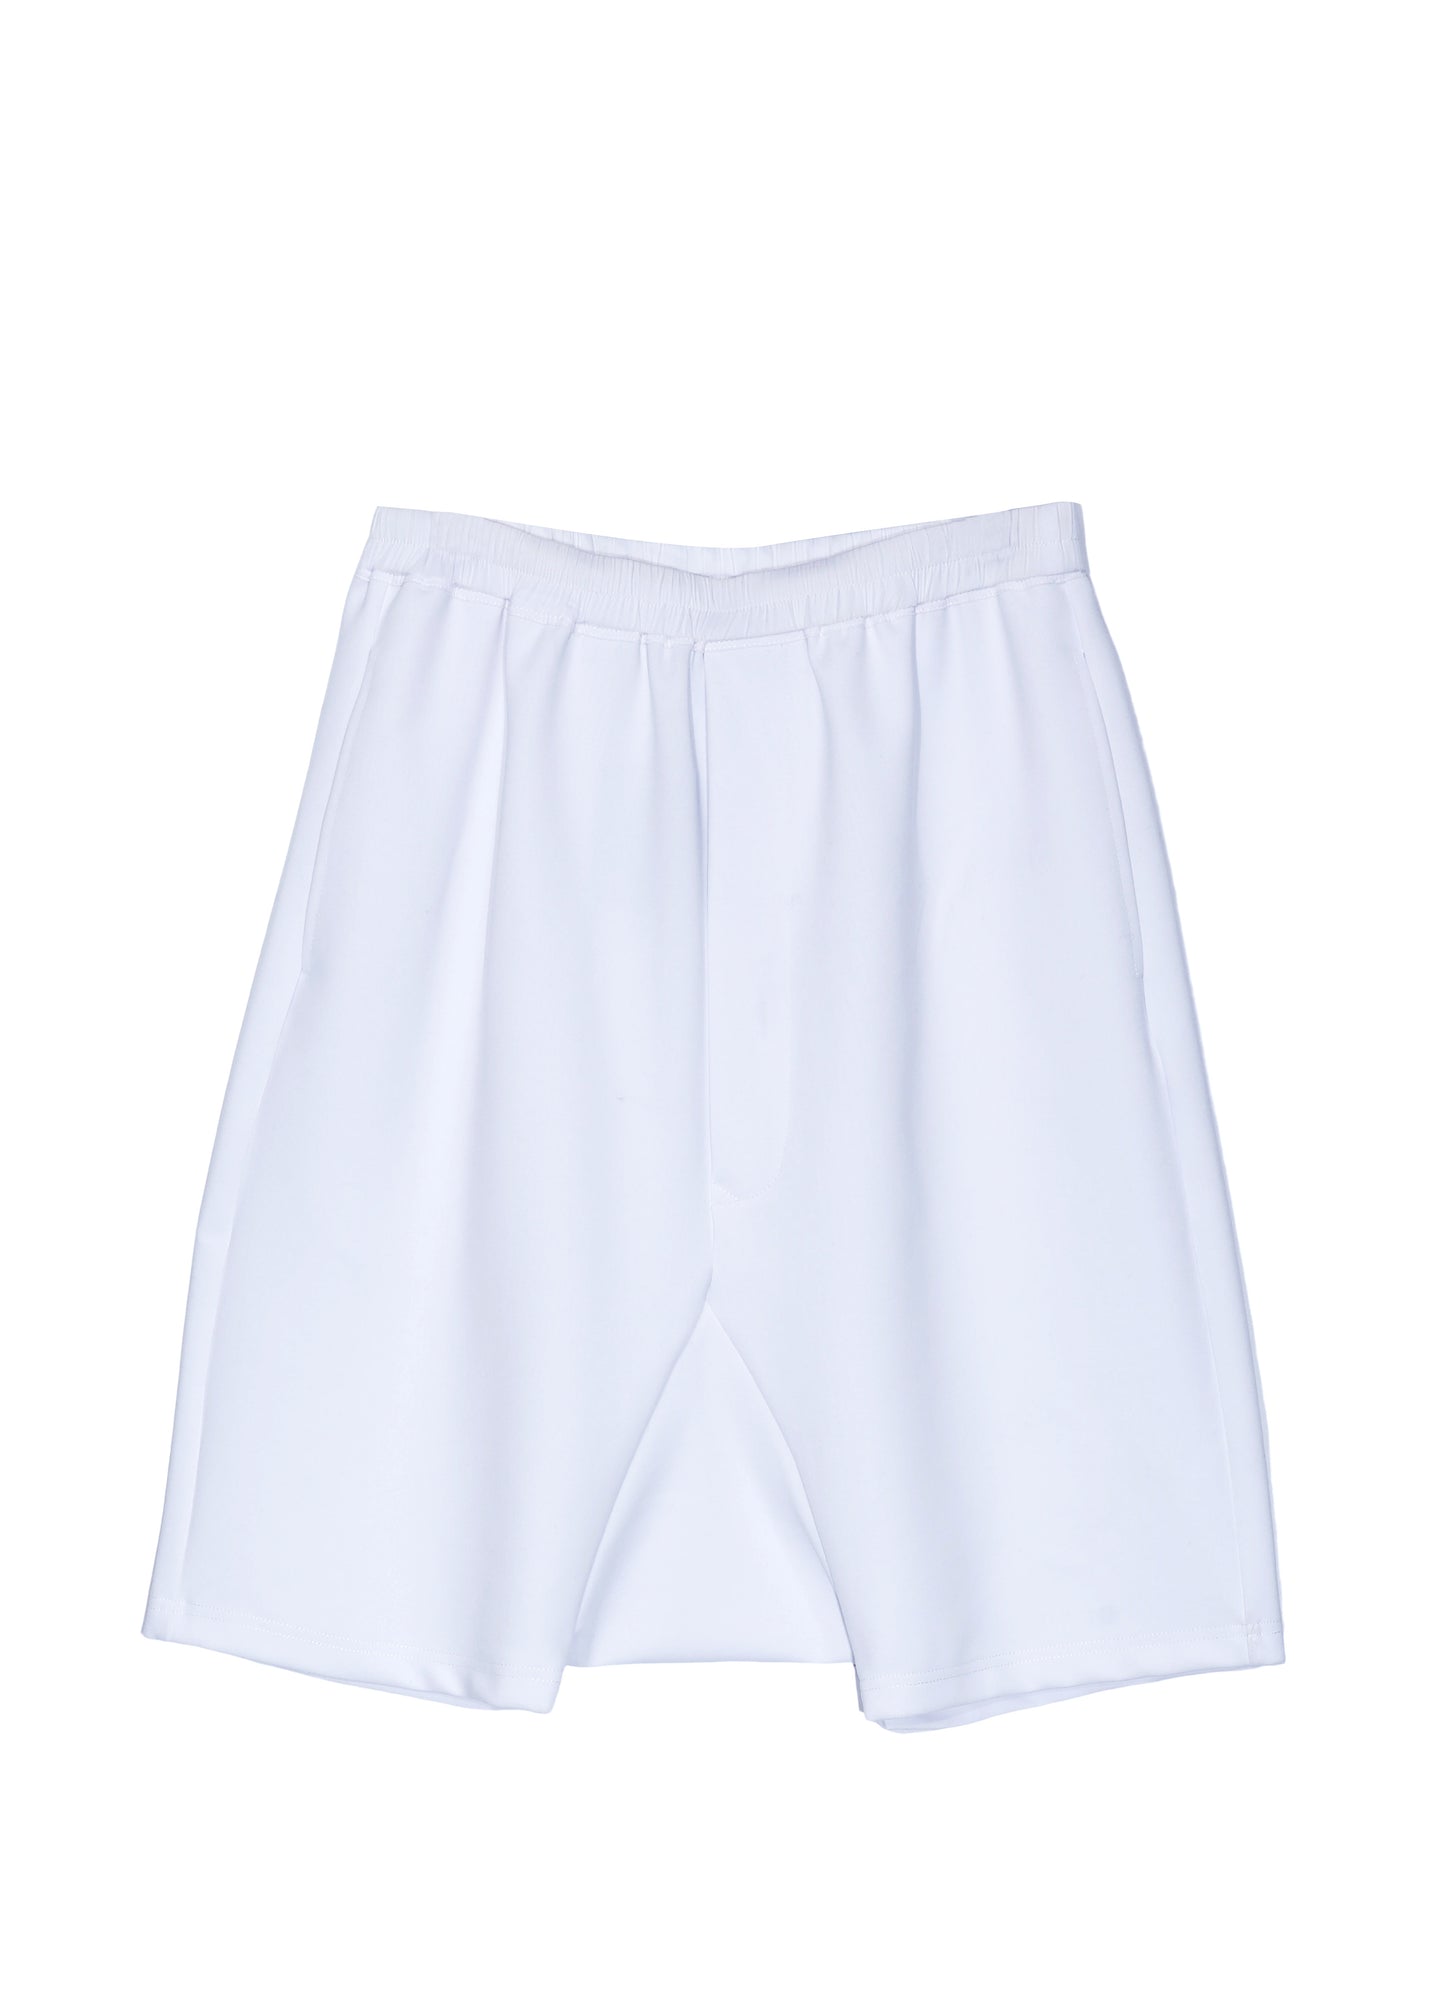 LOW- END SHORTS